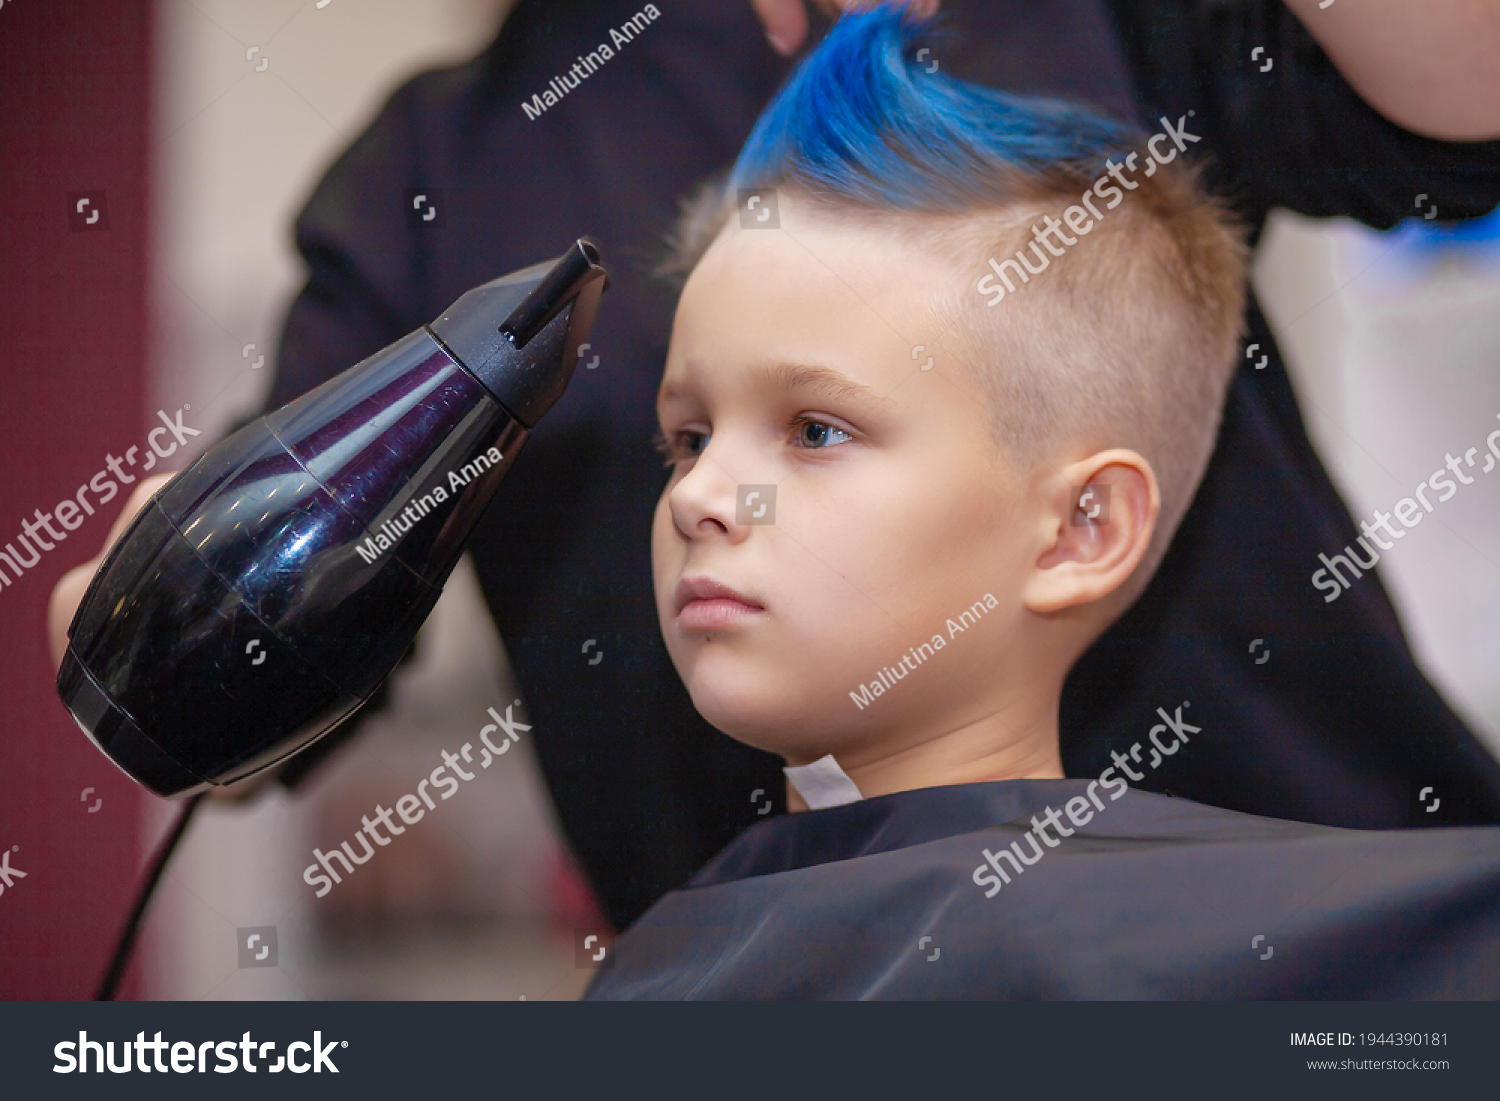 Cute baby boy with blue hair - wide 5